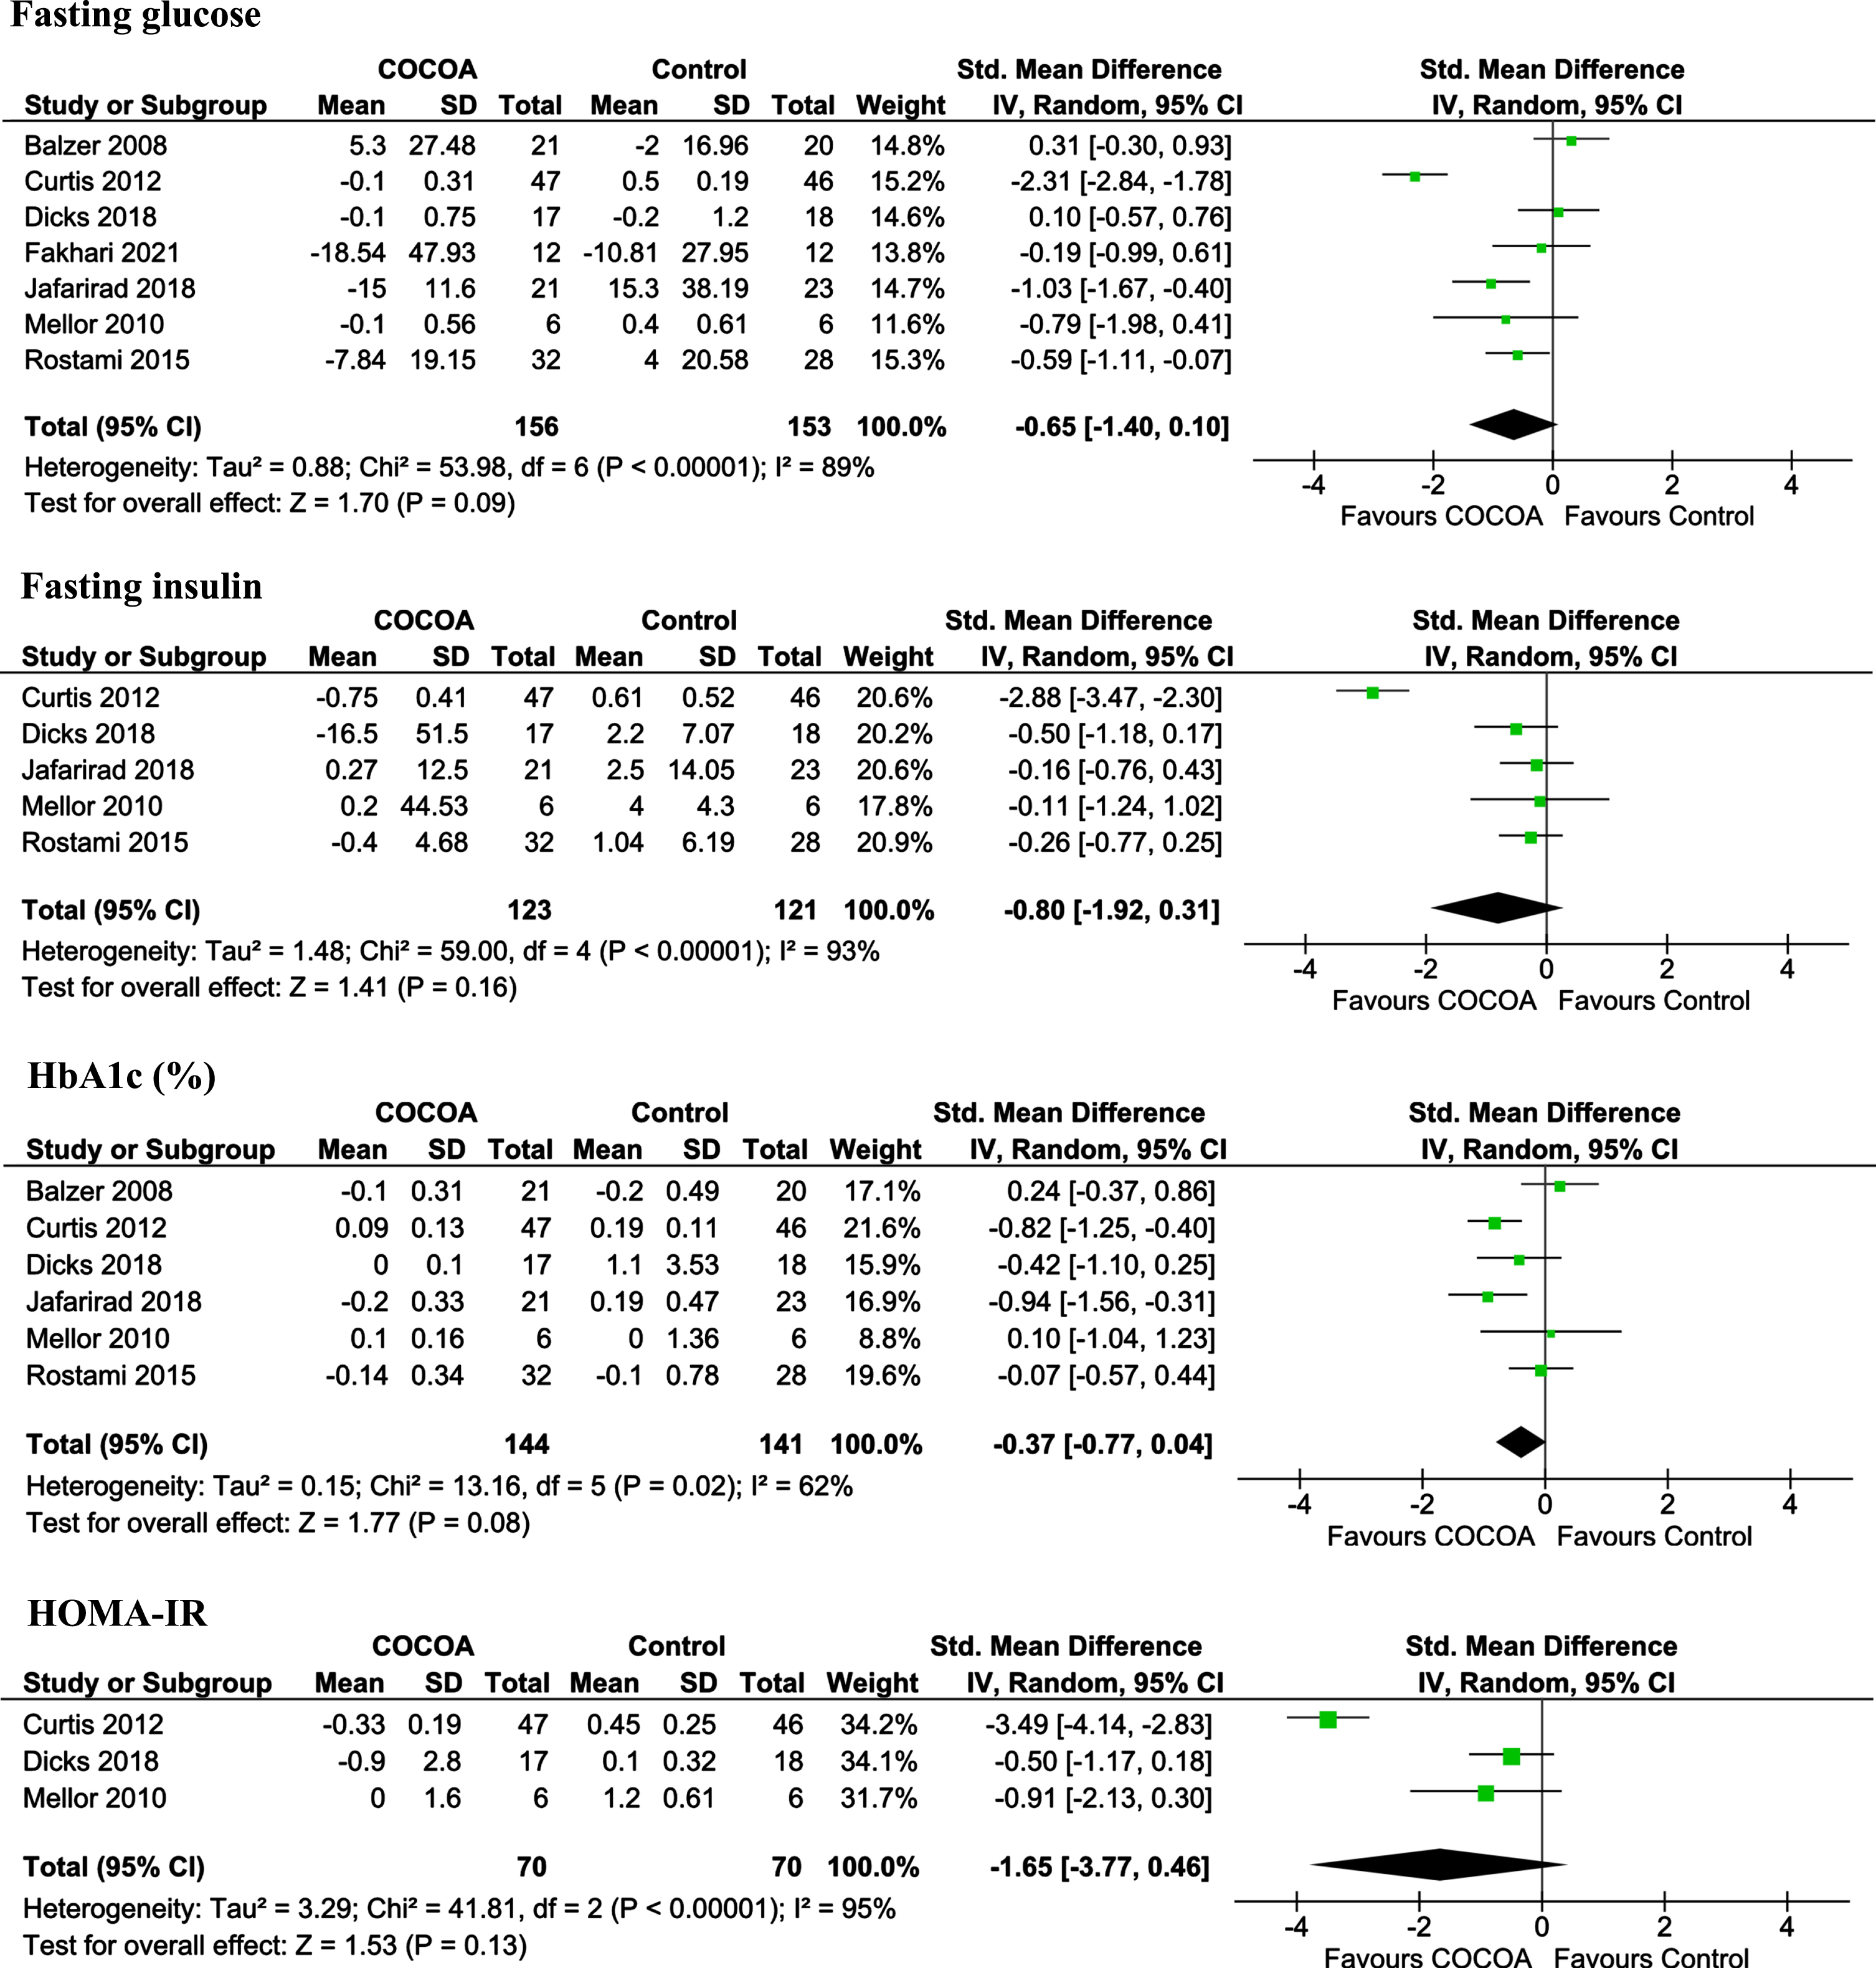 Meta-analysis results of cocoa for each assessed outcome.